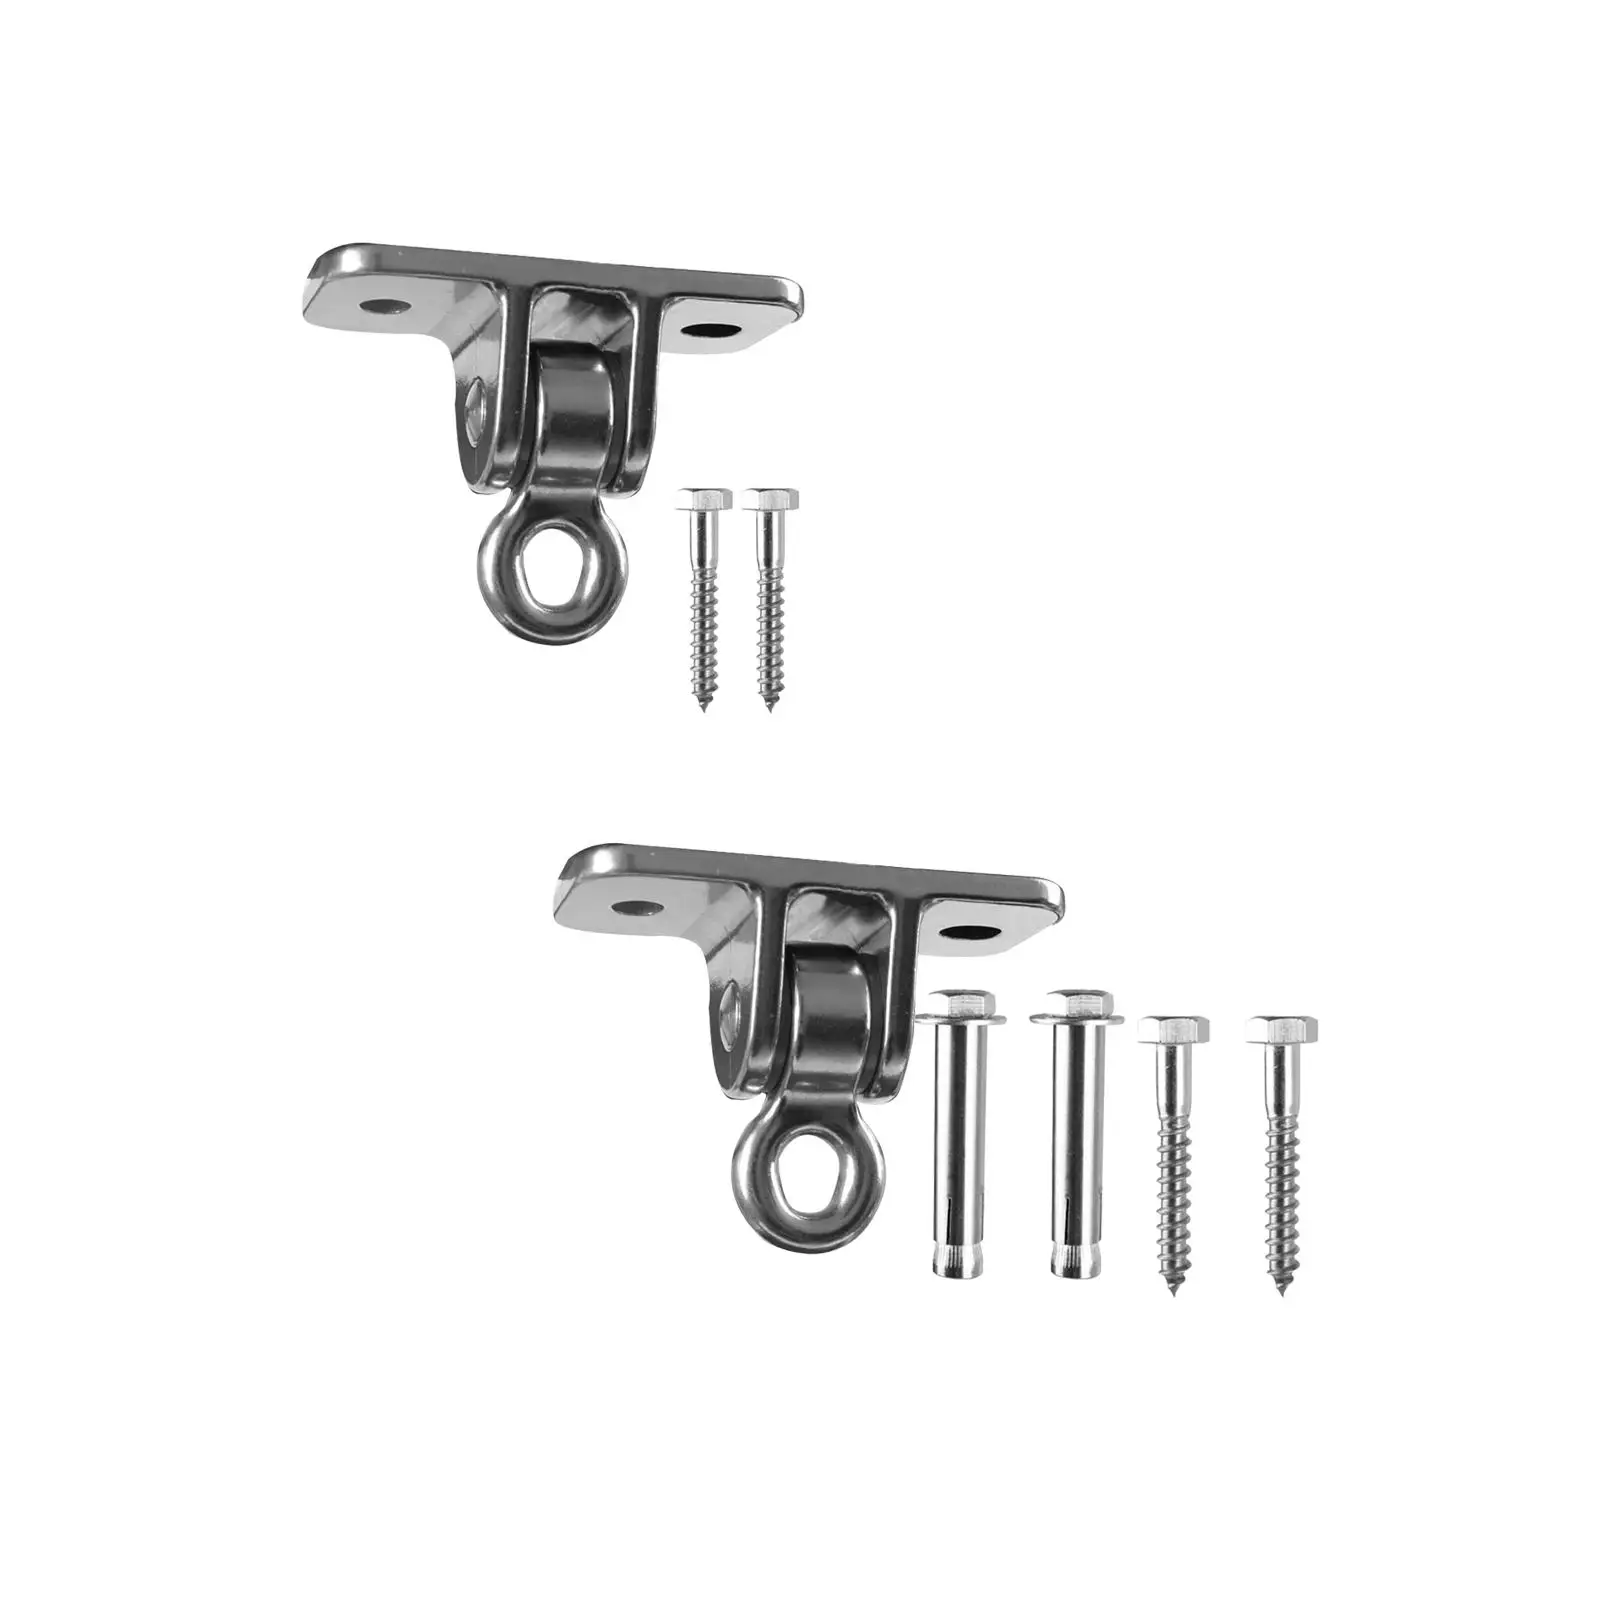 Swing Hanger Buckle Stainless Steel Hardware Mounting Screws for Porch Swing Hammock Chair Heavy Bag Yoga Gymnastic Rings